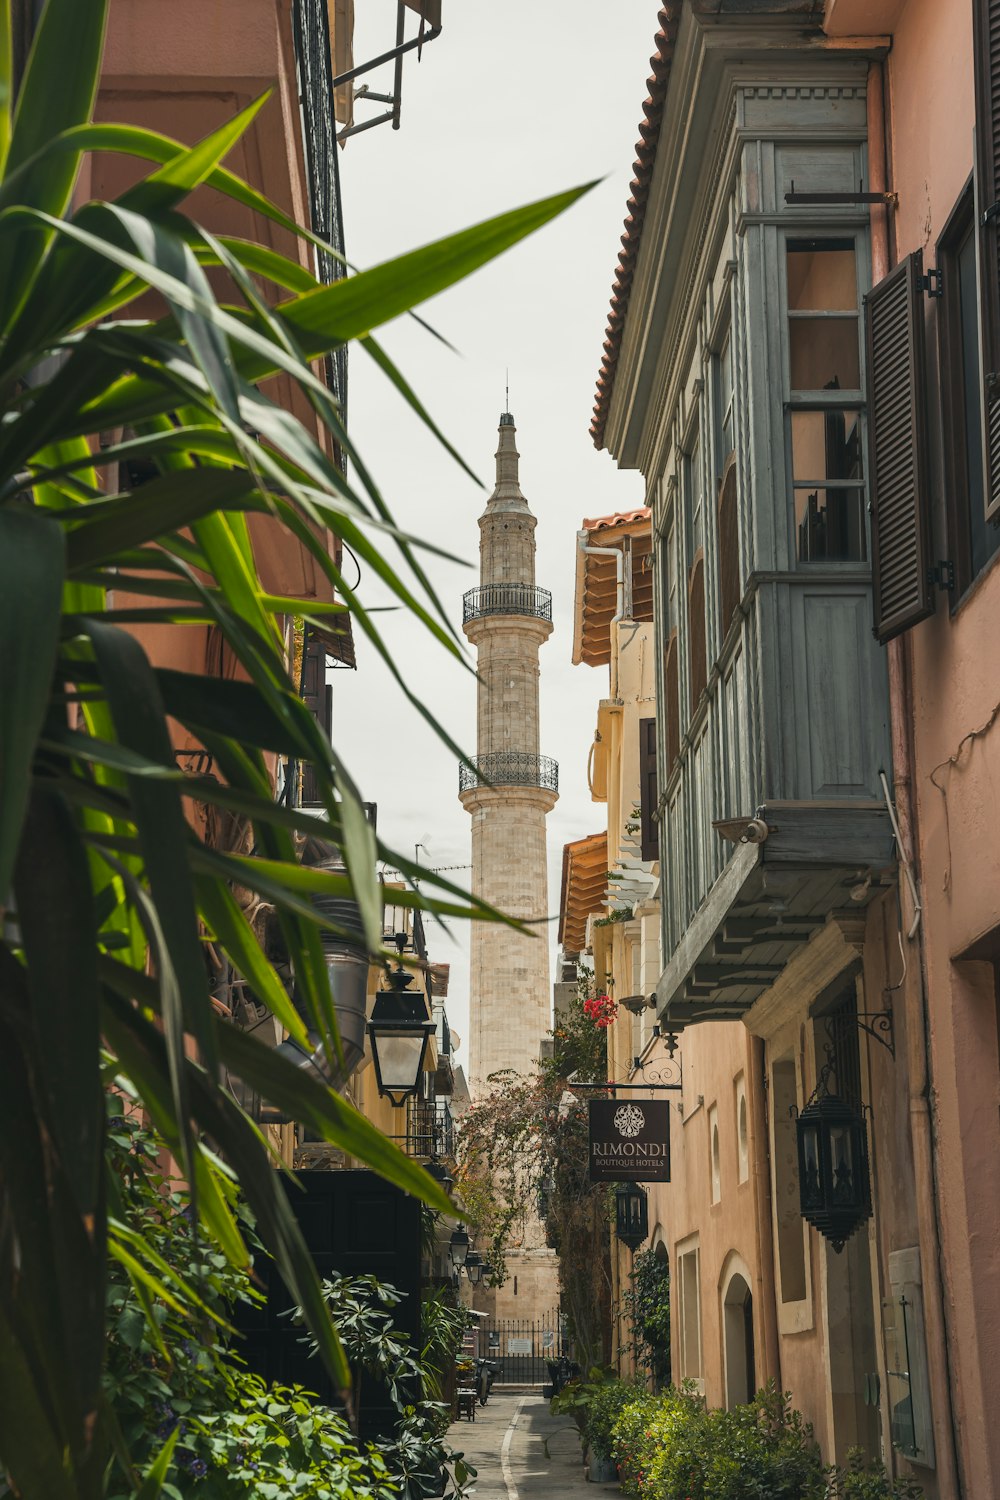 a narrow street with a tall tower in the background